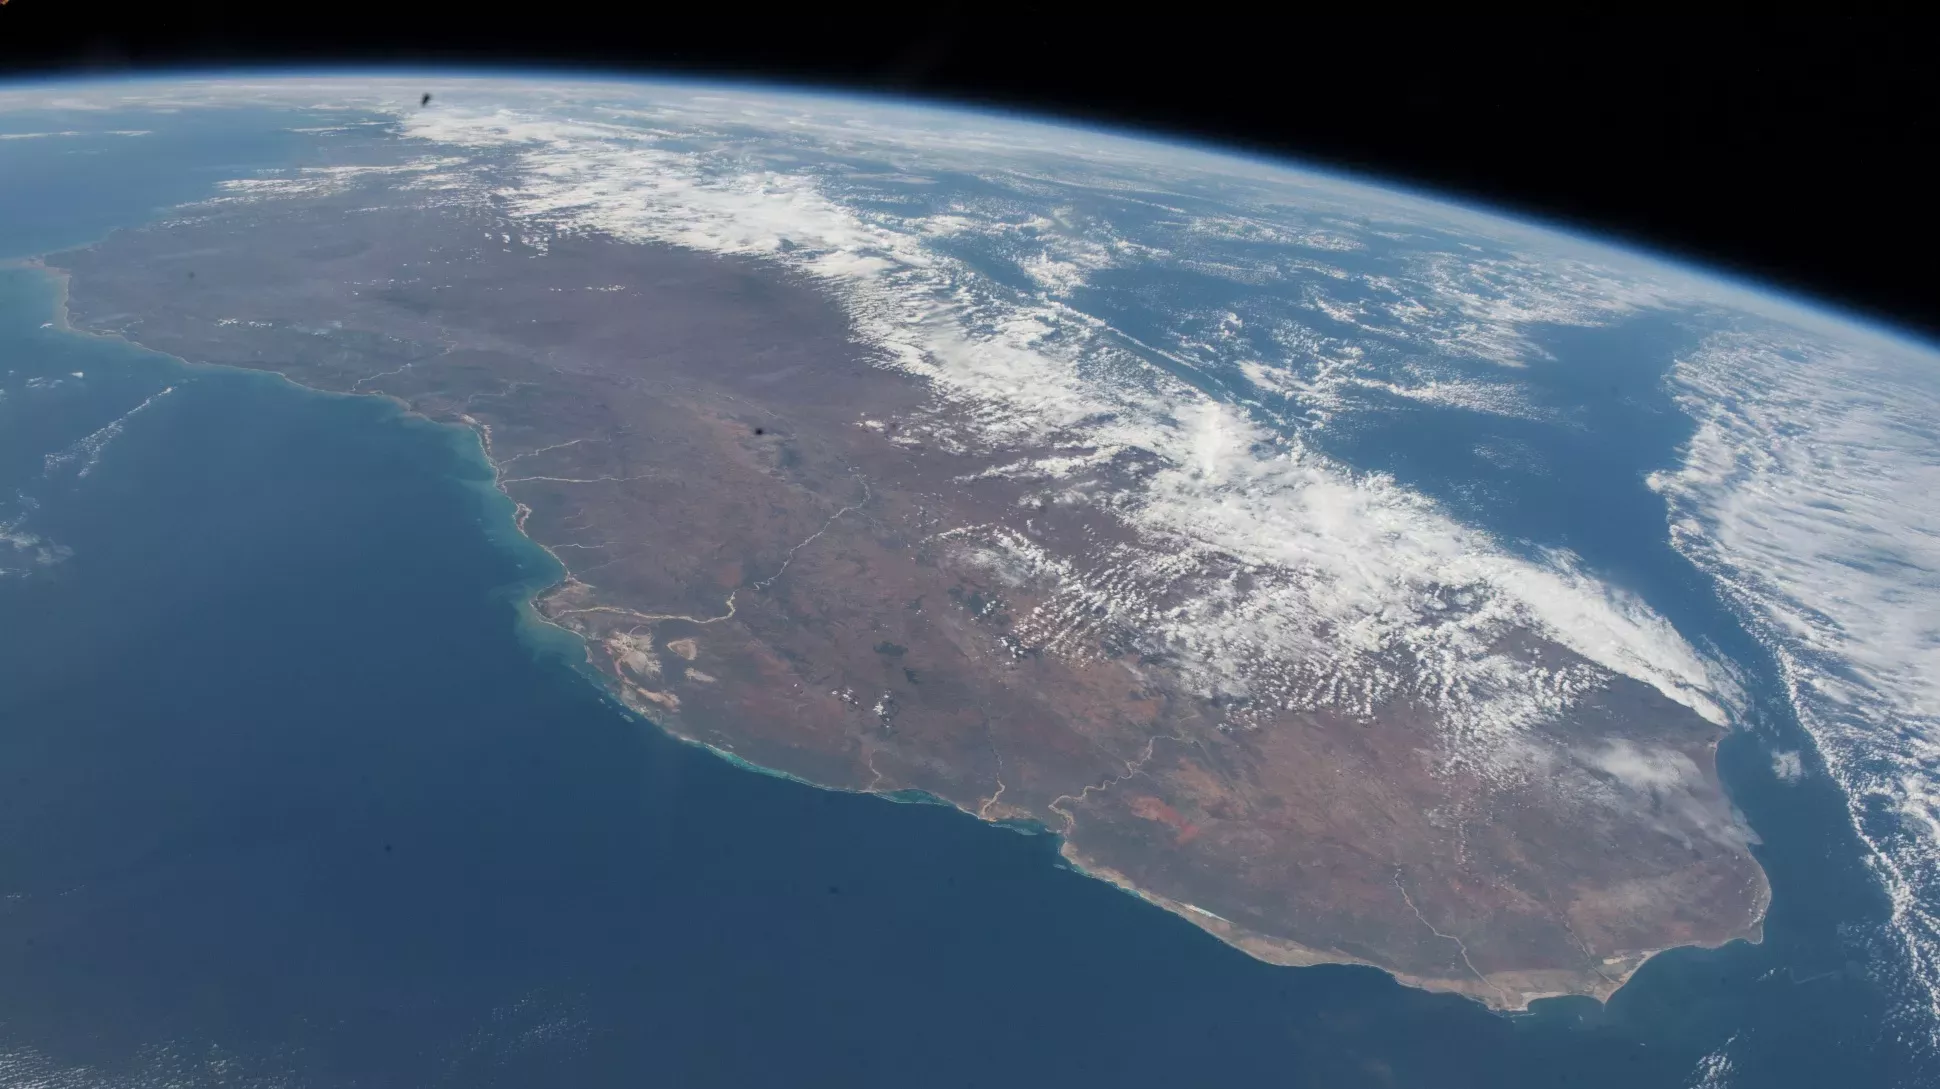 A shot showing curvature of the earth and the island of madagascar